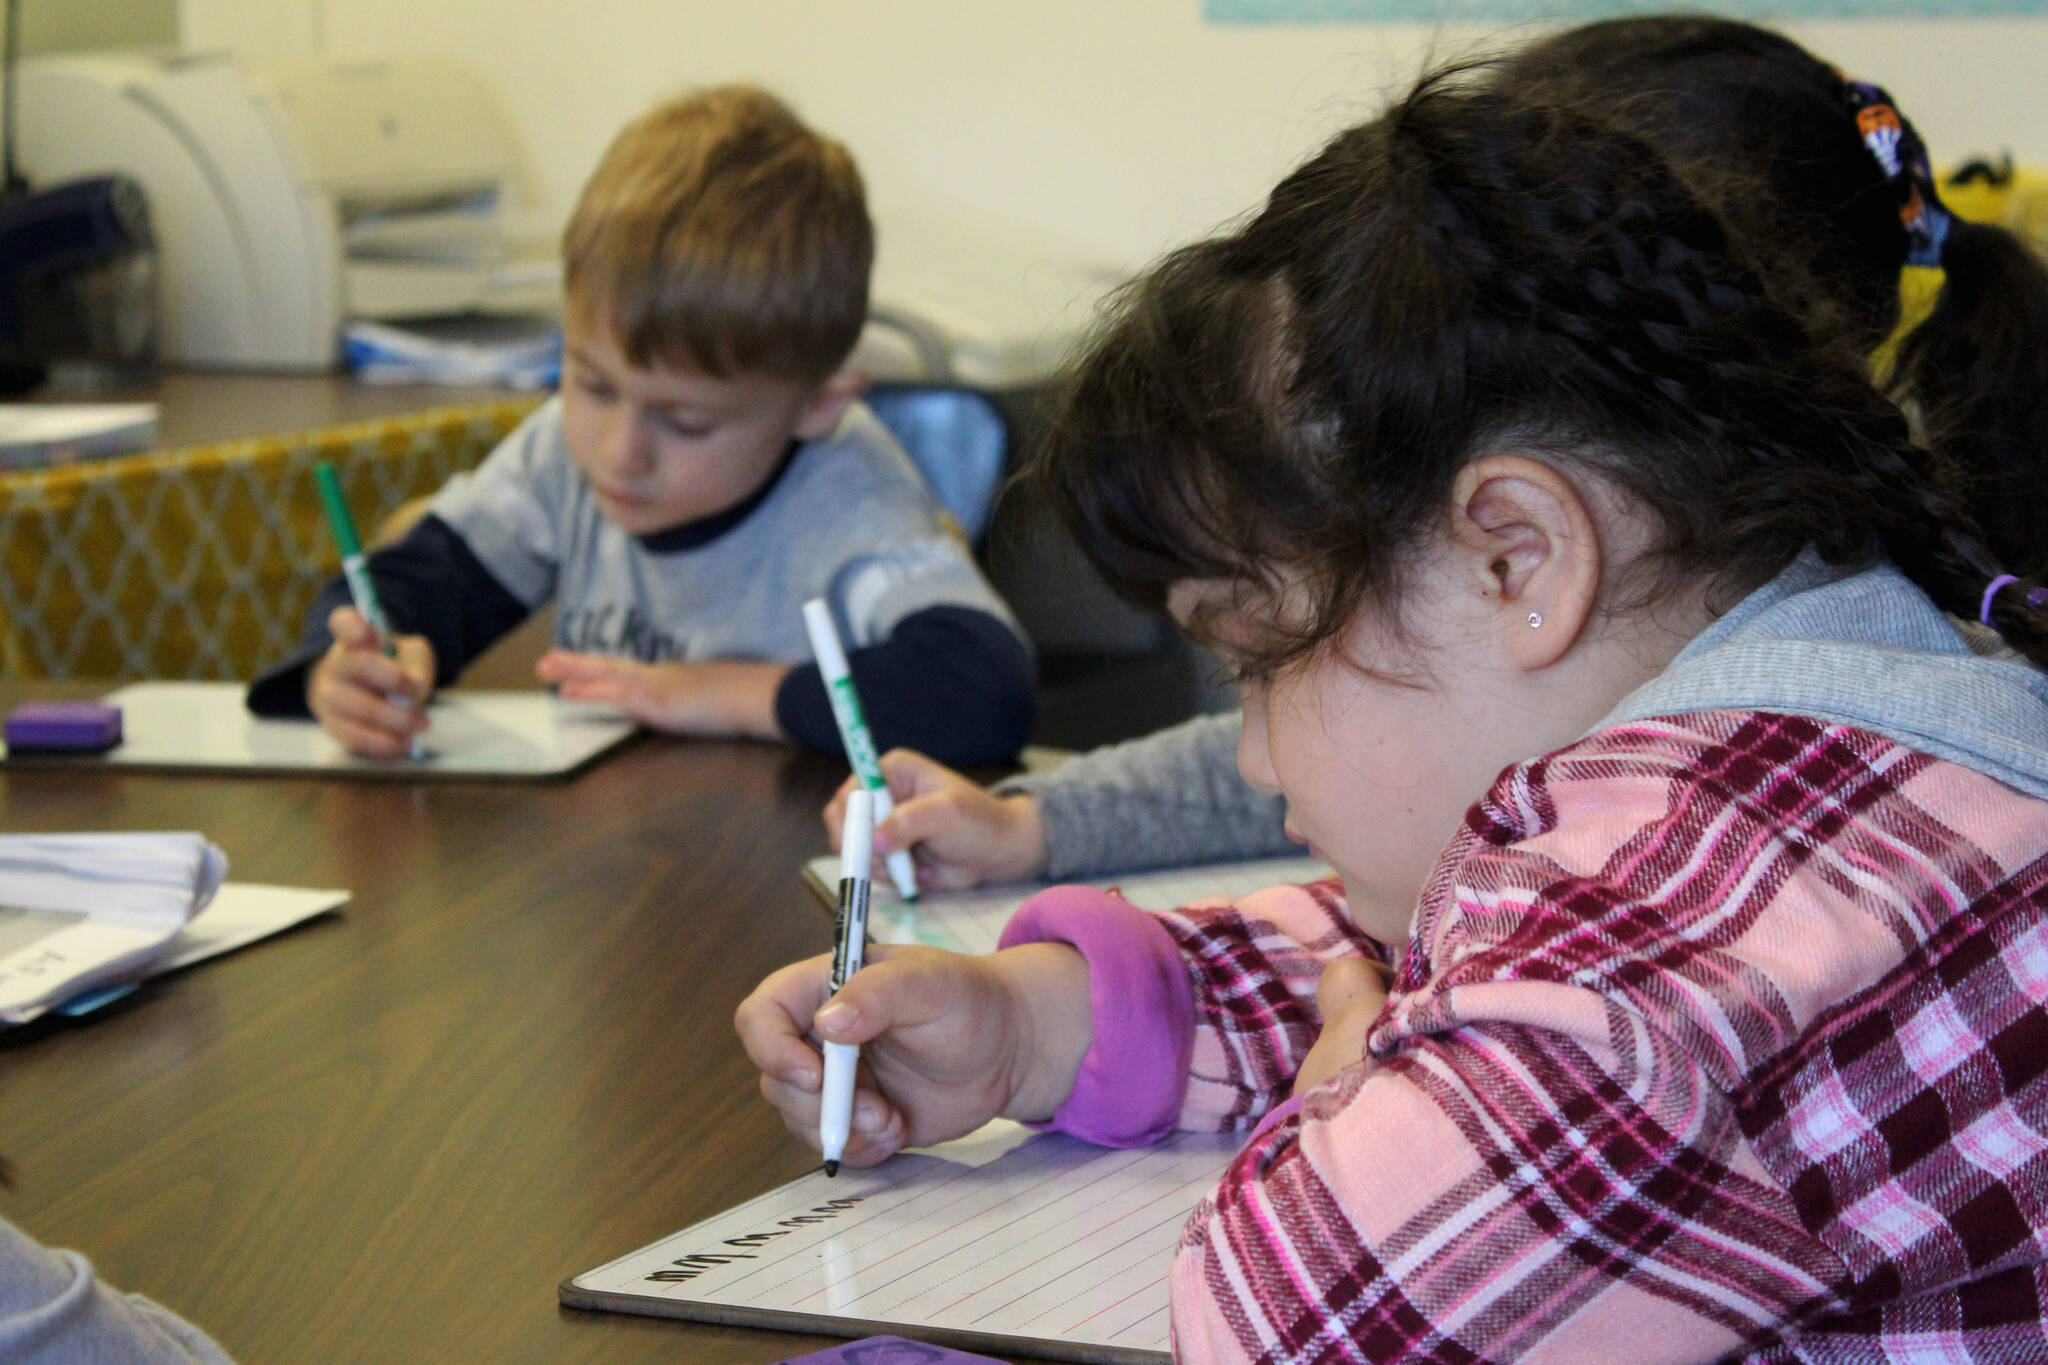 Students practice writing the letter “M” during a group activity led by Mountain View Elementary School Interventionist Katie Schneider on Thursday, Oct. 19, 2023, in Kenai, Alaska. (Ashlyn O’Hara/Peninsula Clarion)